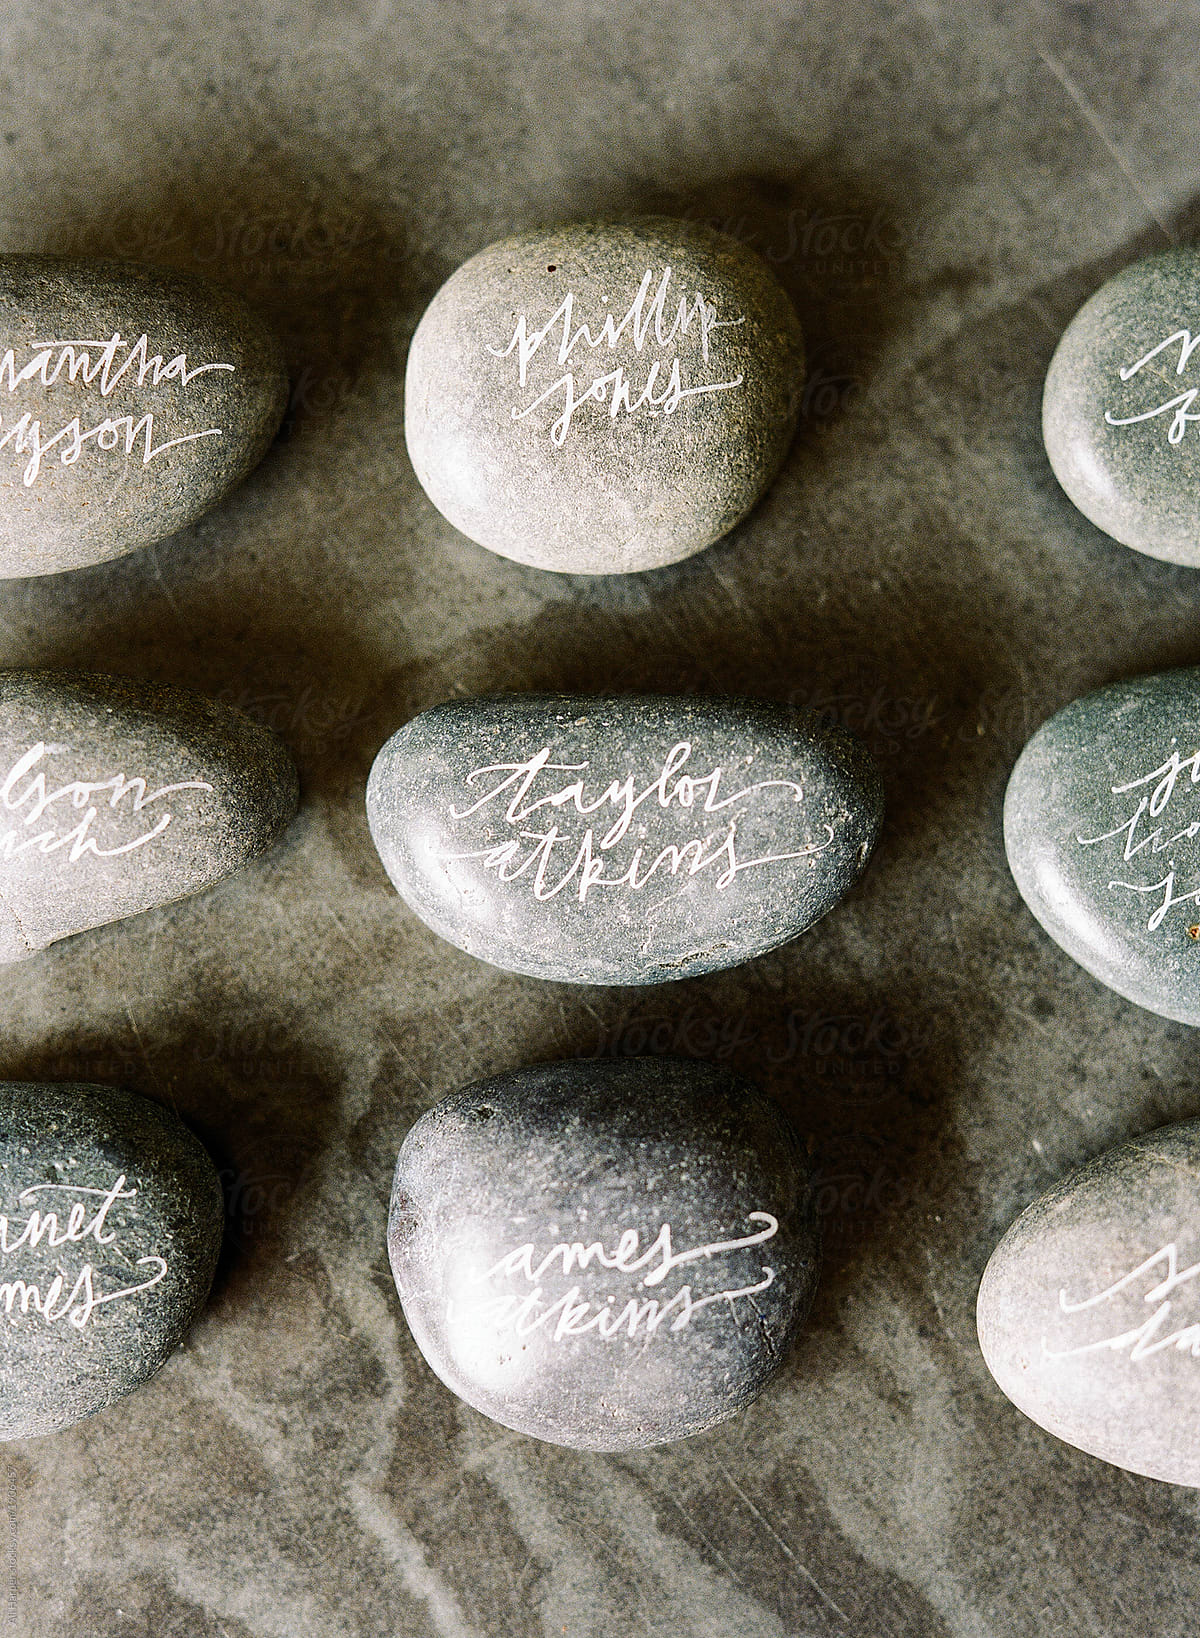 River rocks with fake names done in beautiful calligraphy